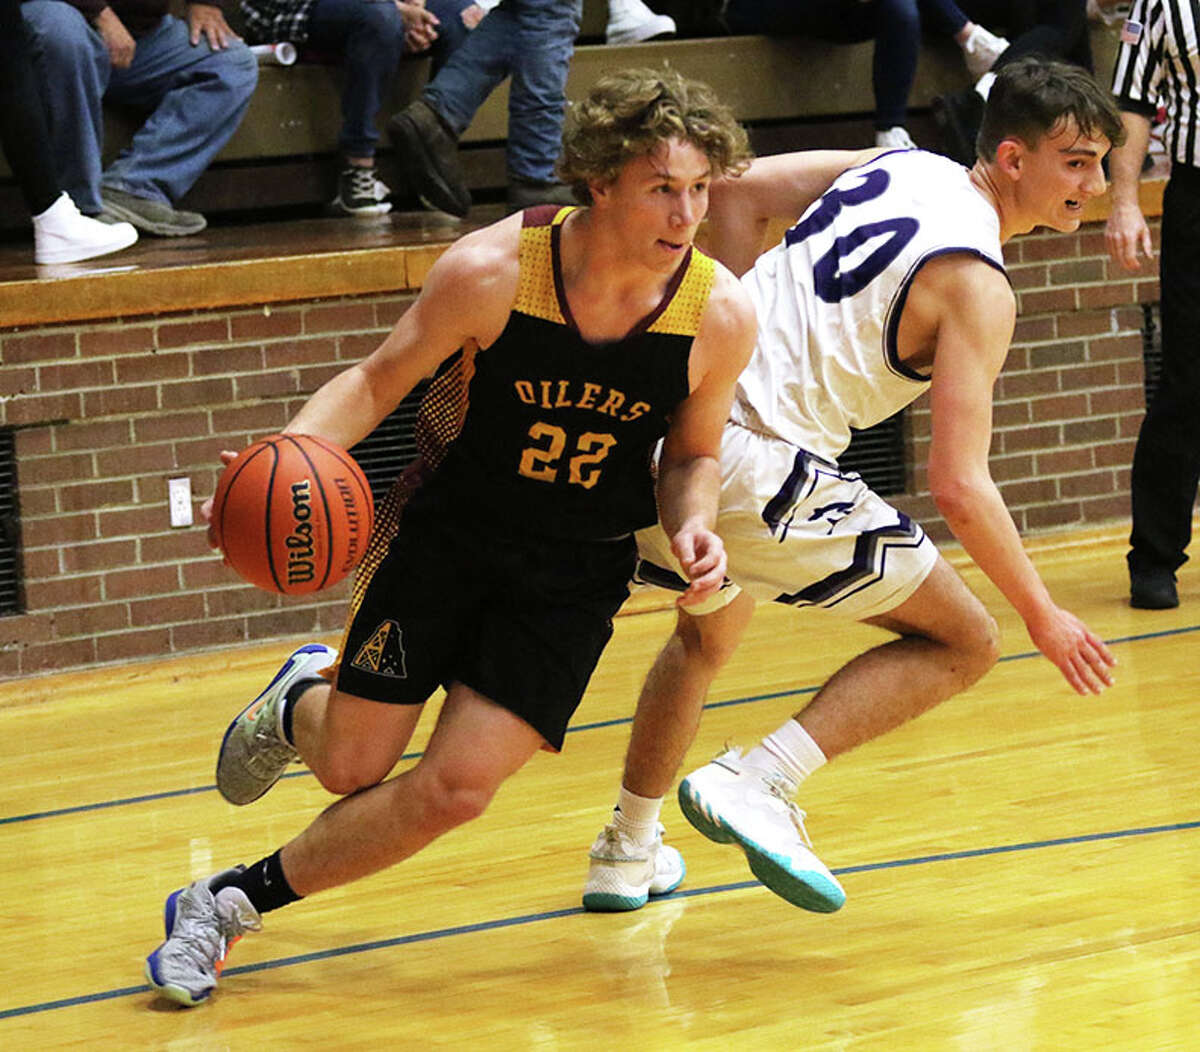 EA-WR's Seth Slayden (left) drives baseline on Litchfield's Gavin Thimsen in the championship game of the Carlinville Holiday Tournament on Dec. 29 at Carlinville. 